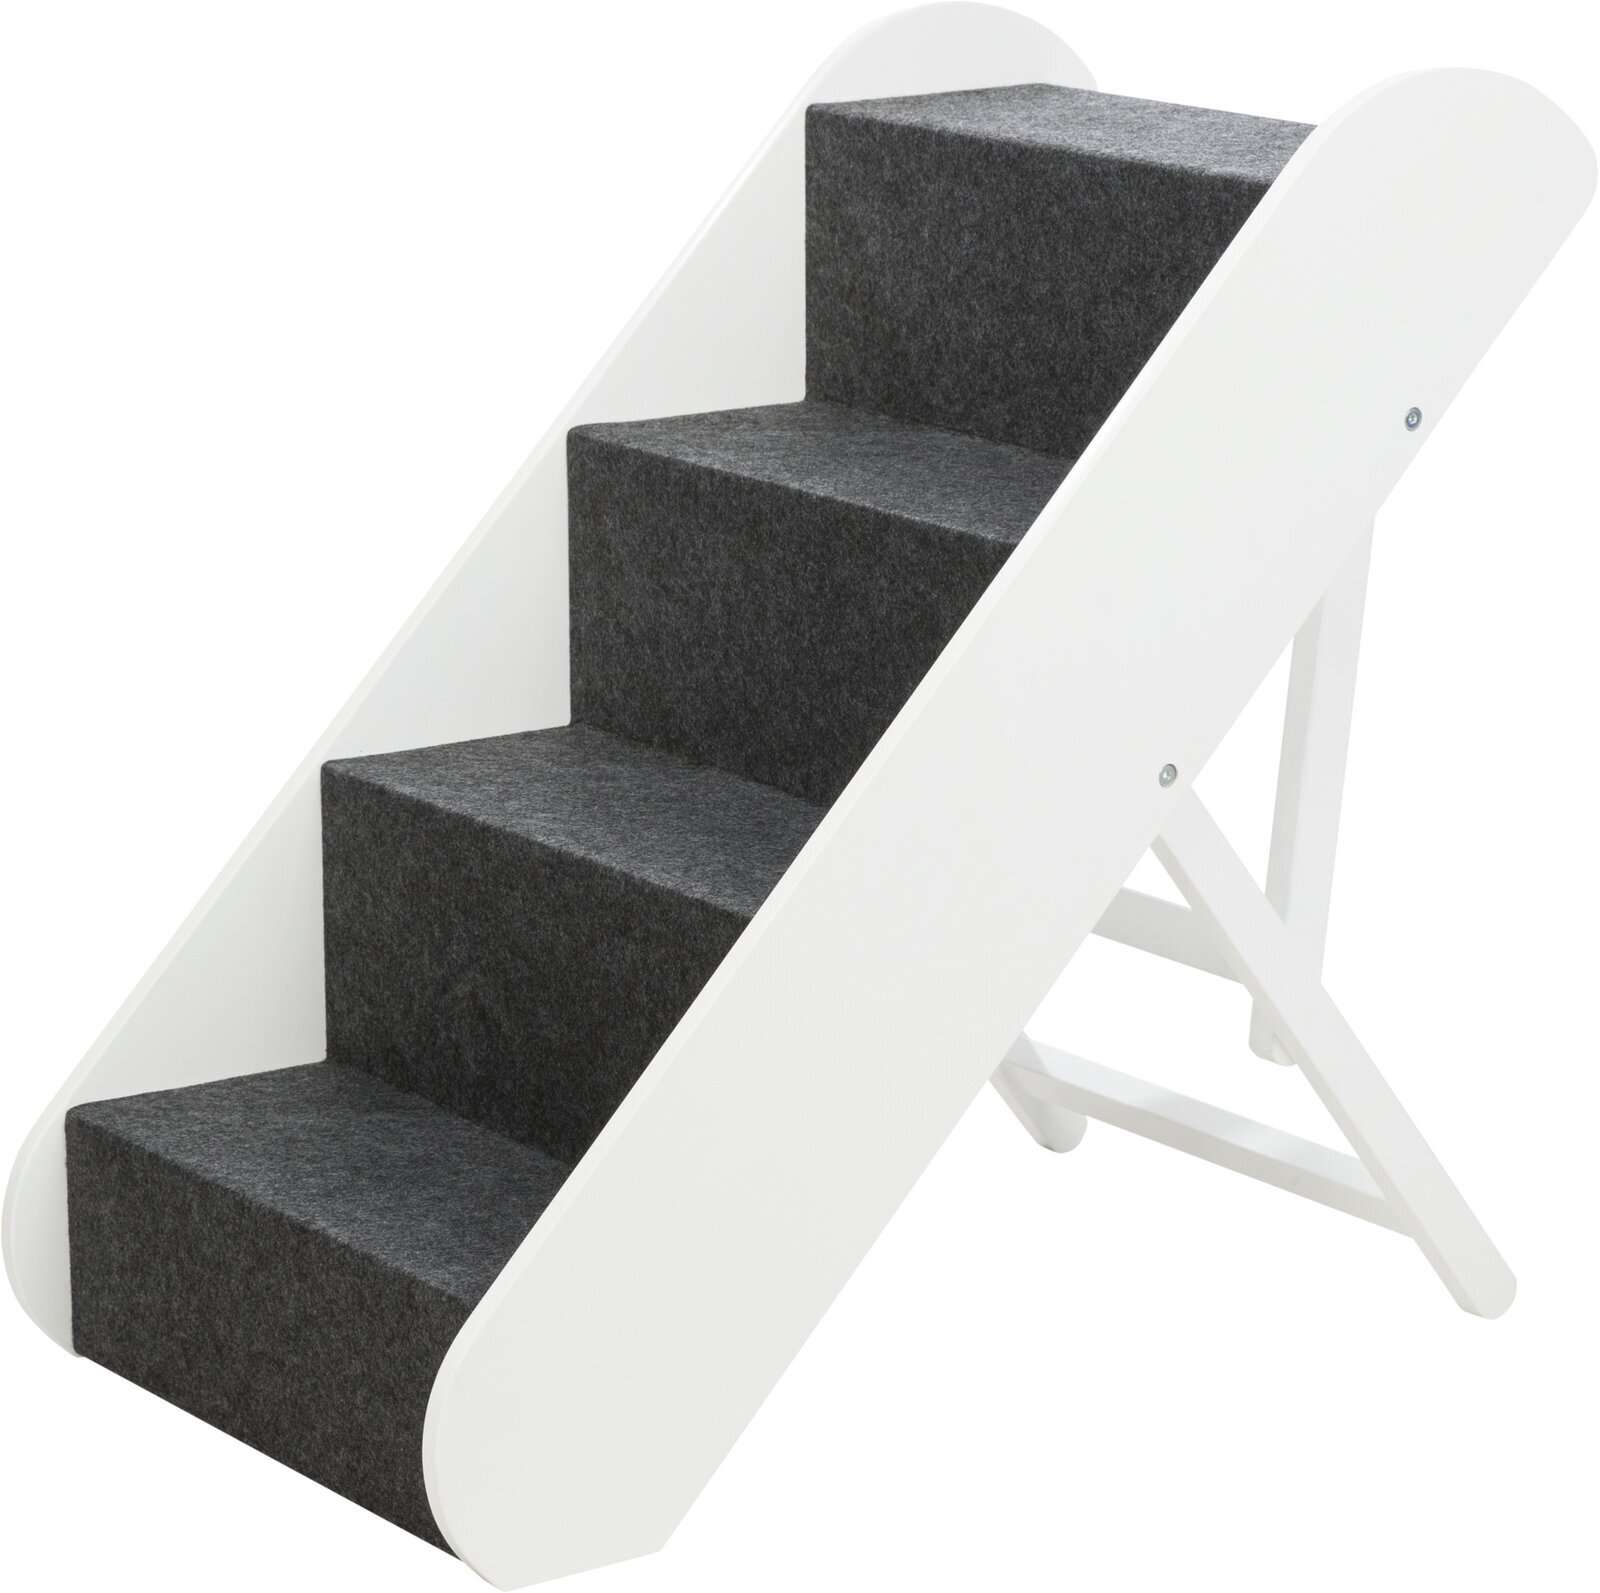 Glenview Adjustable 4 Step Stairs